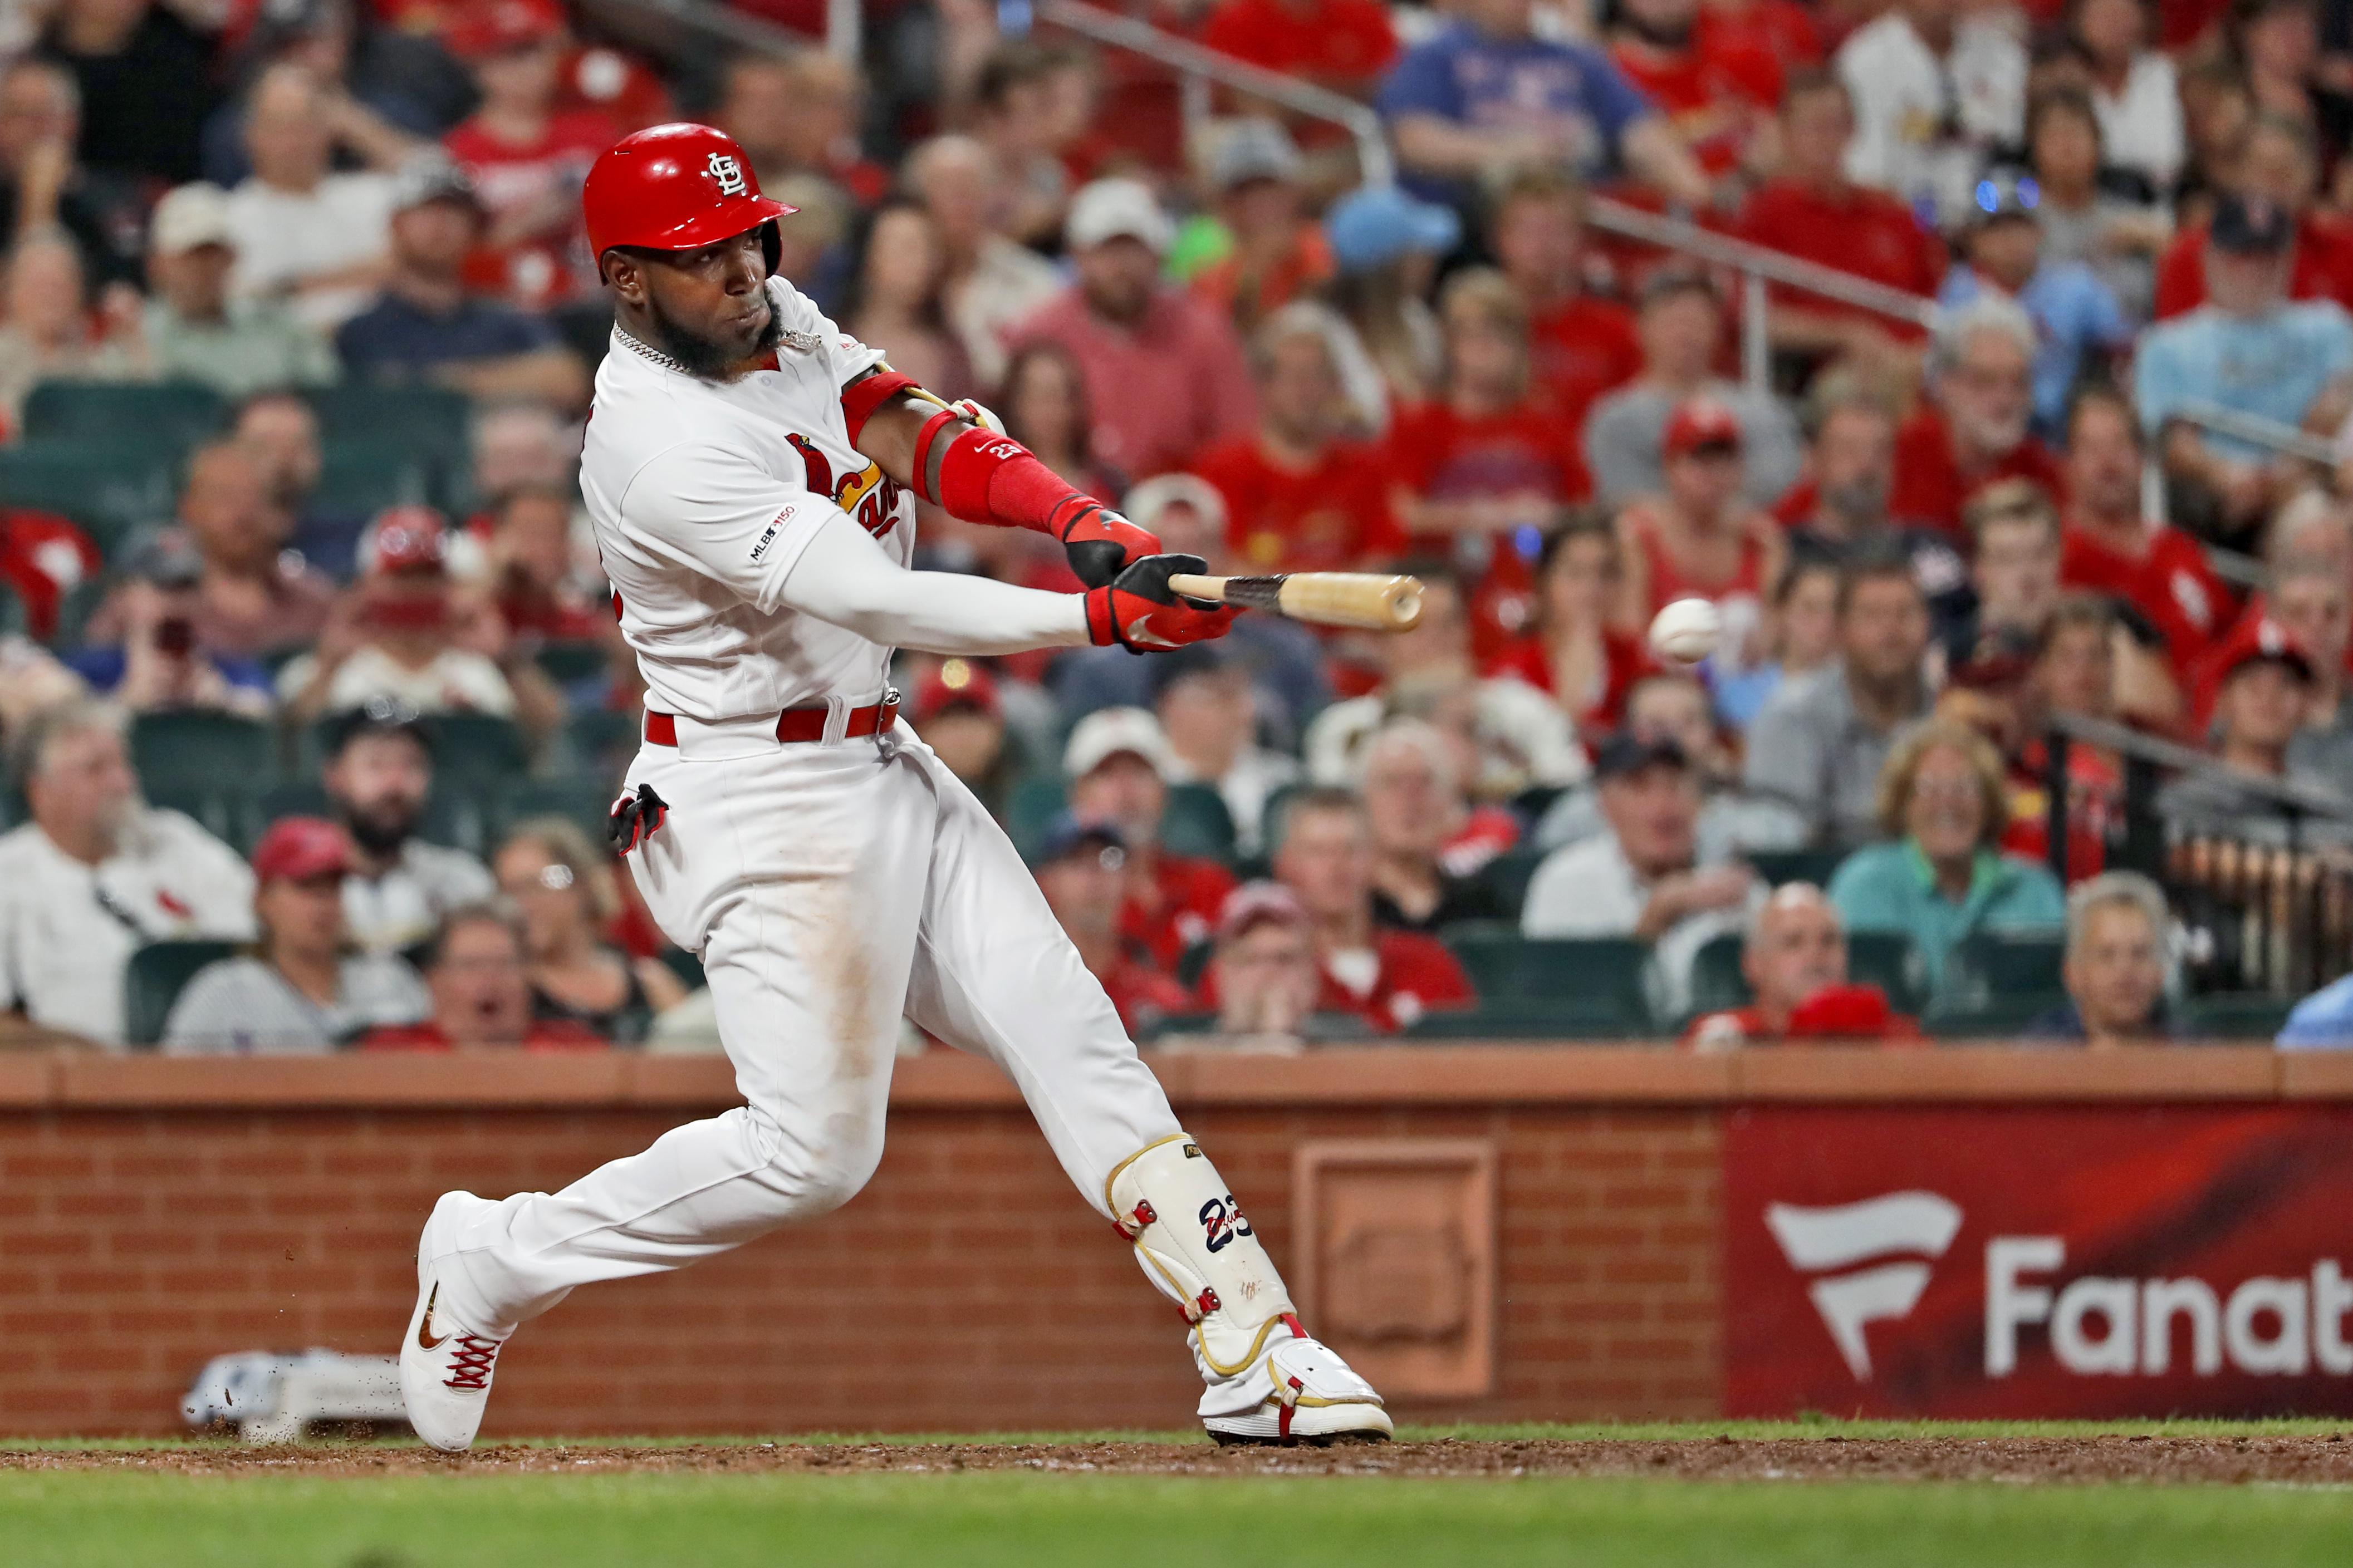 MLB roundup: Marcell Ozuna drives in every run in Cardinals’ 4-2 win over Nationals | The ...